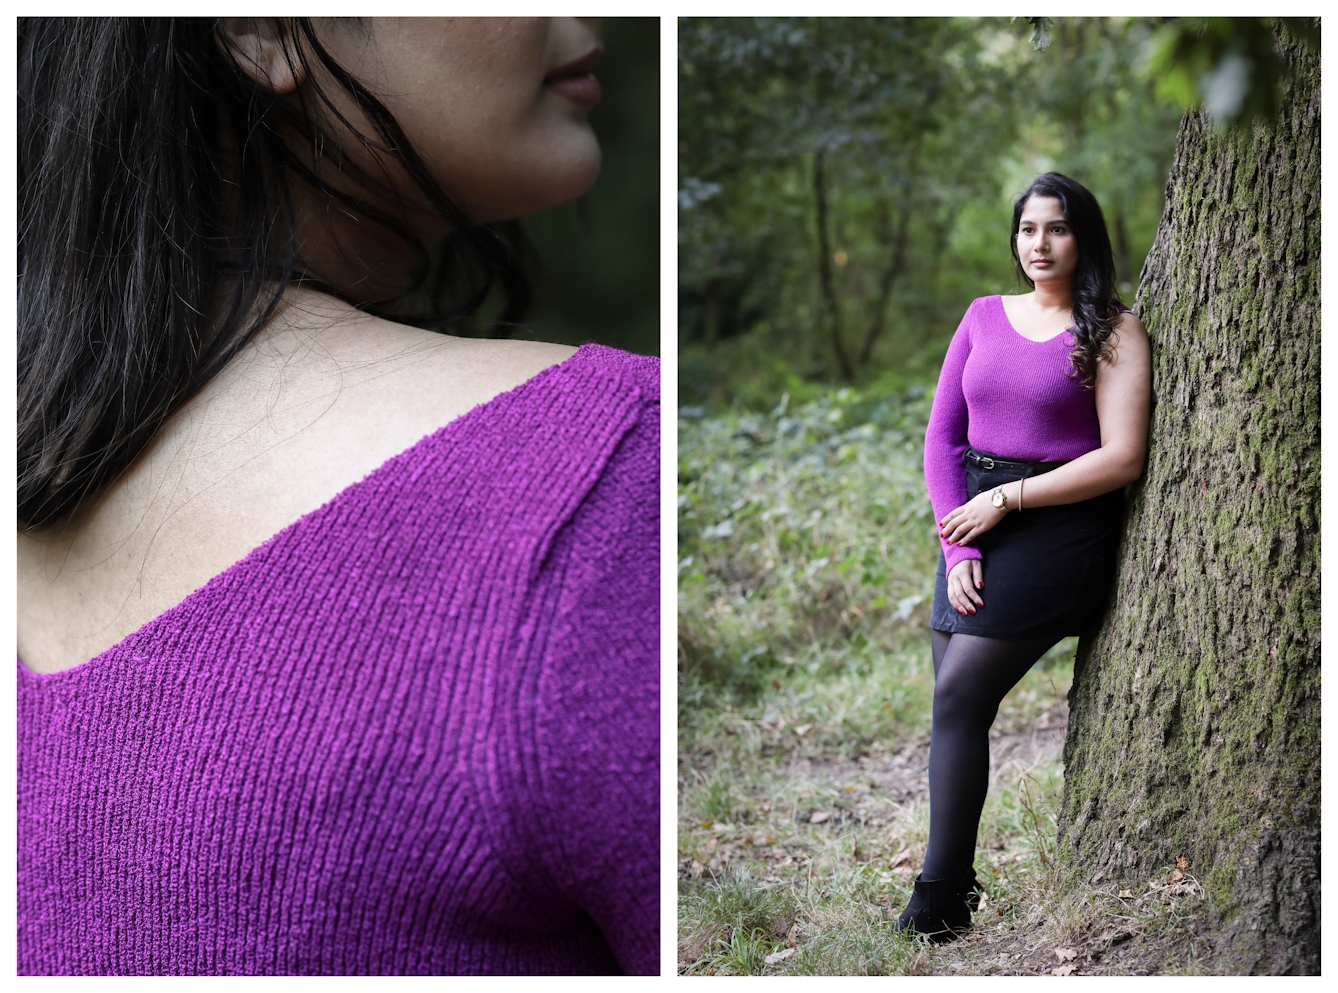 Photographic diptych. The image on the right shows a full length view of a woman leaning against a tree trunk who is wearing a purple woollen top and black thy length skirt. The top has one full length right arm and one bear left arm. She is standing looking off to camera left, with her left hand crossing her body to touch her right wrist. In the background can be seen a park or woodland scene. The image on the left shows a close-up of the same woman in the same top, concentrating on her right shoulder from behind so the material of the top can be seen against the skin of her back and shoulder. The profile of the bottom half of her face can just be seen at the top of the frame.